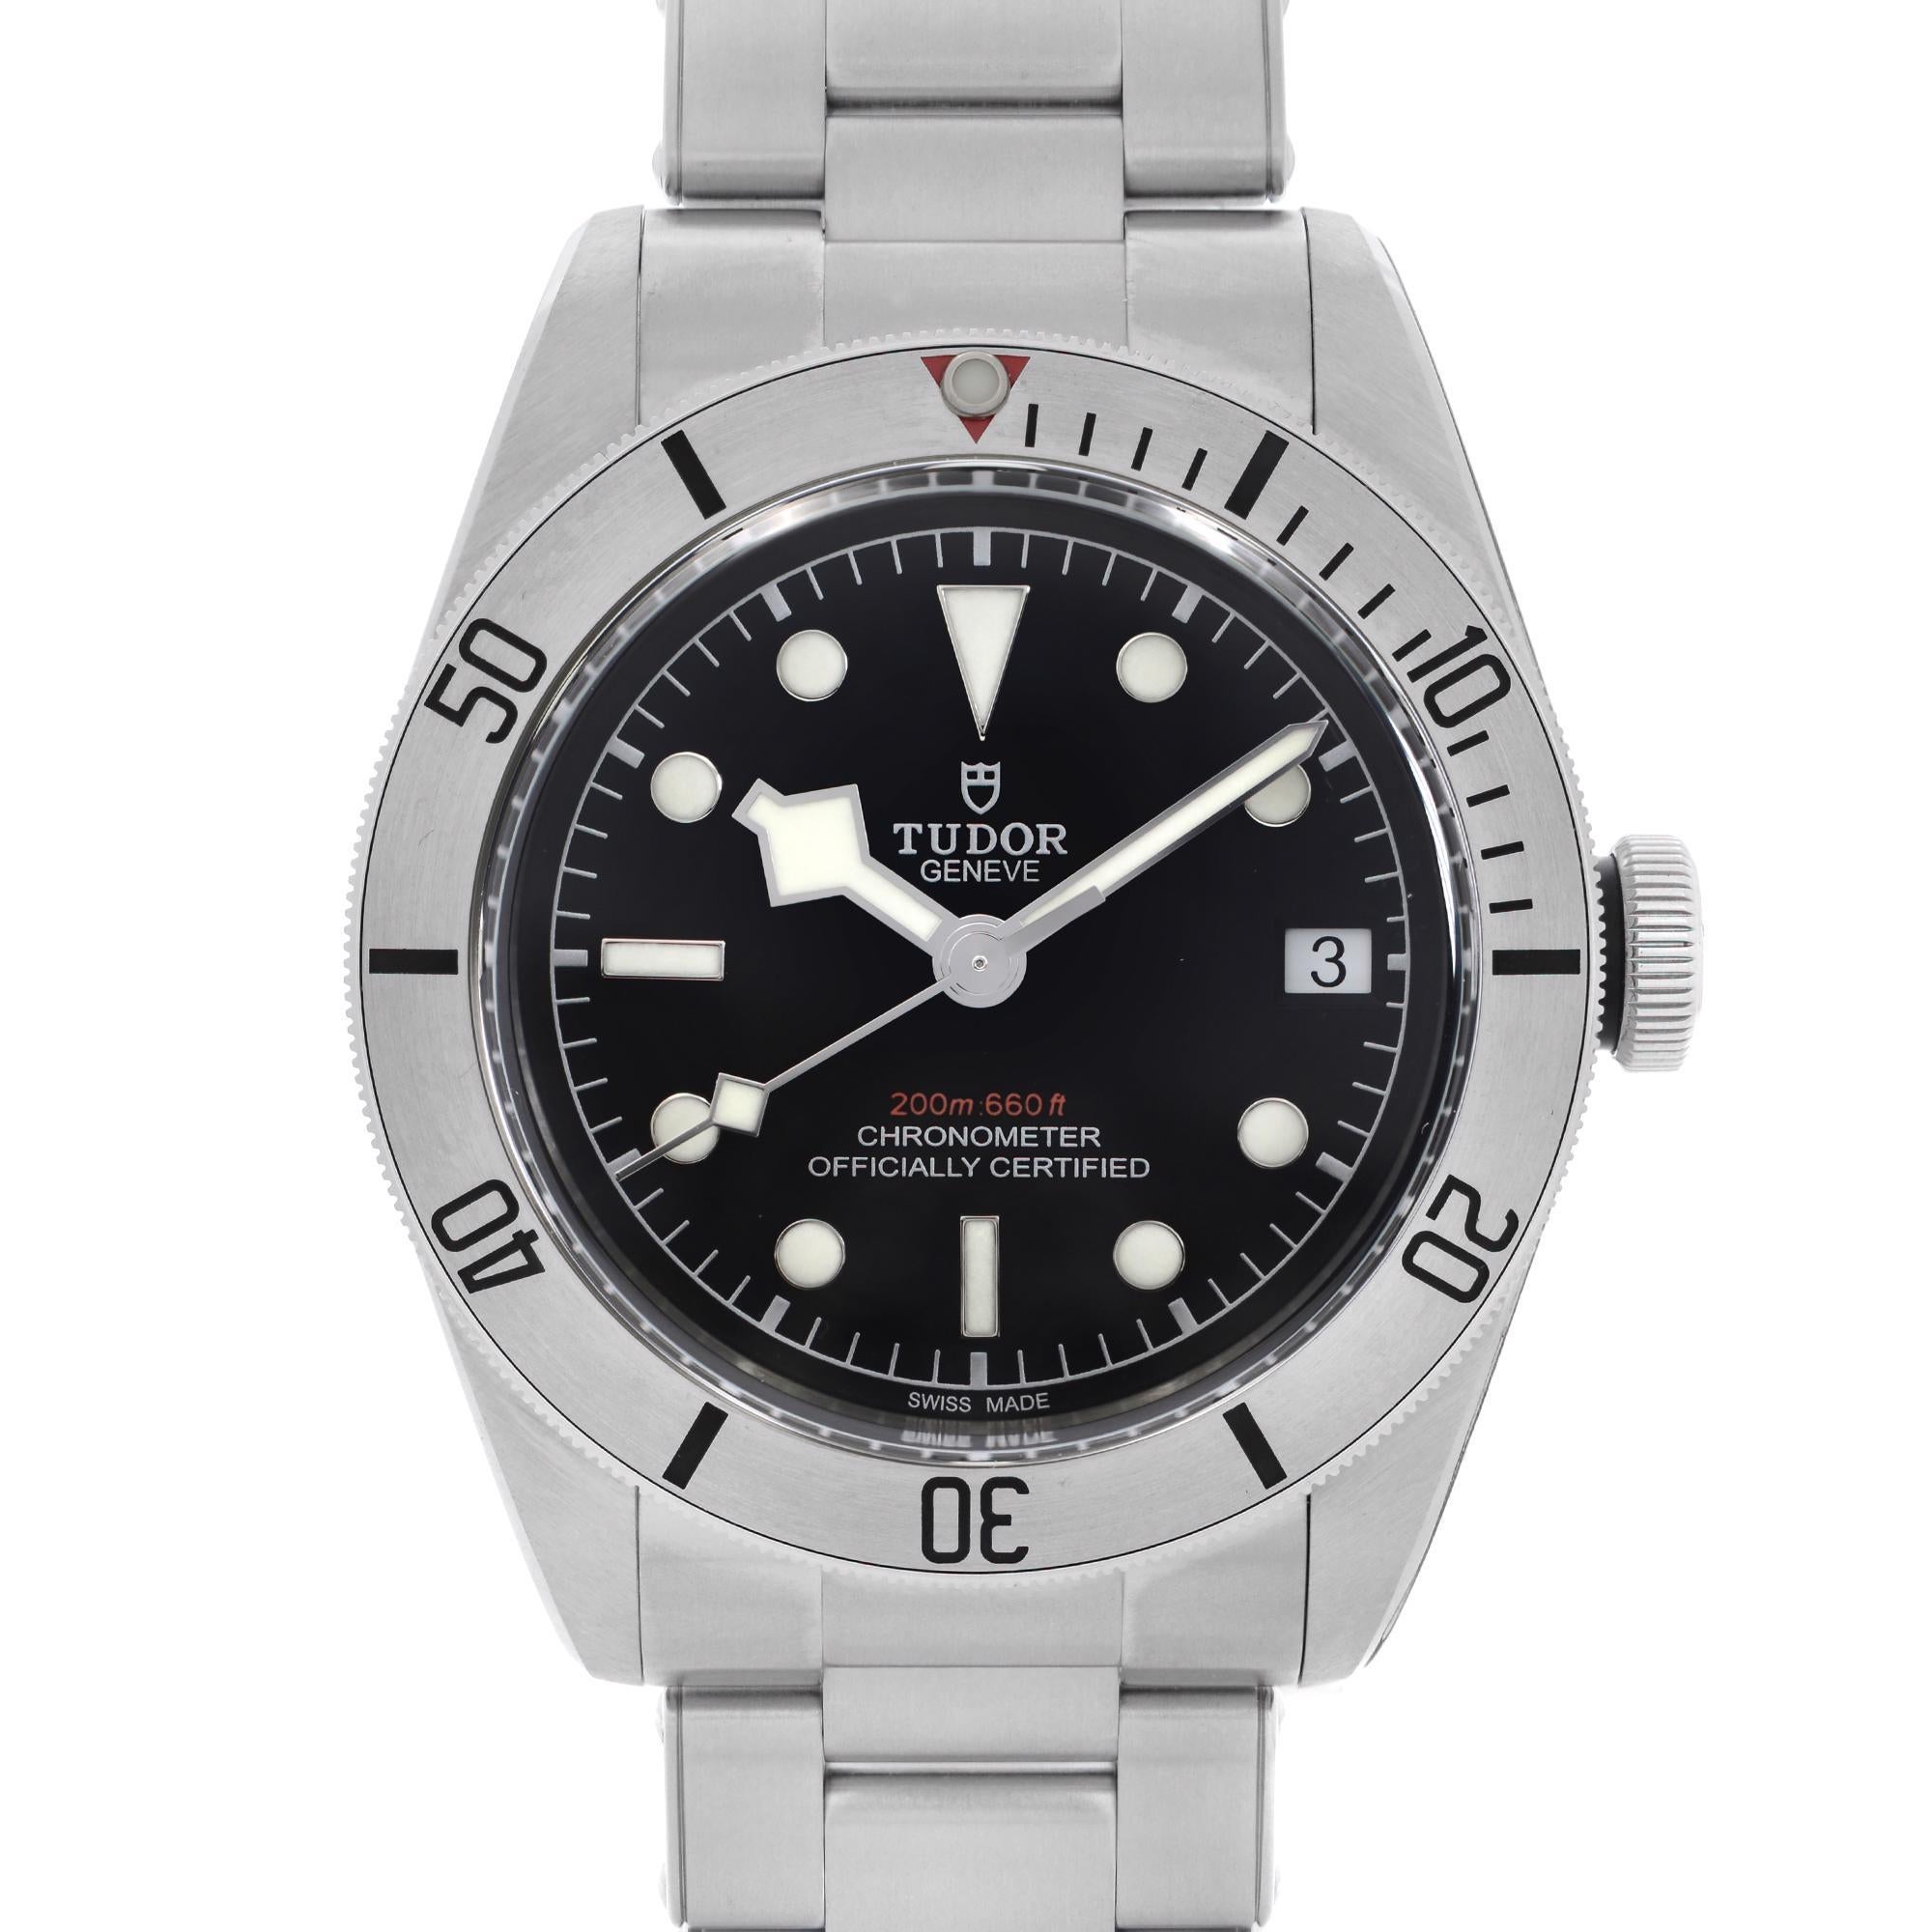 Unworn Tudor Heritage Black Bay M79730-0006. Card 2022. Original Box, Papers, Tudor Hang Tag are Included. This Beautiful Men's Timepiece is Powered By a Mechanical (Automatic) Movement and Features: Stainless Steel Case and Bracelet, Unidirectional